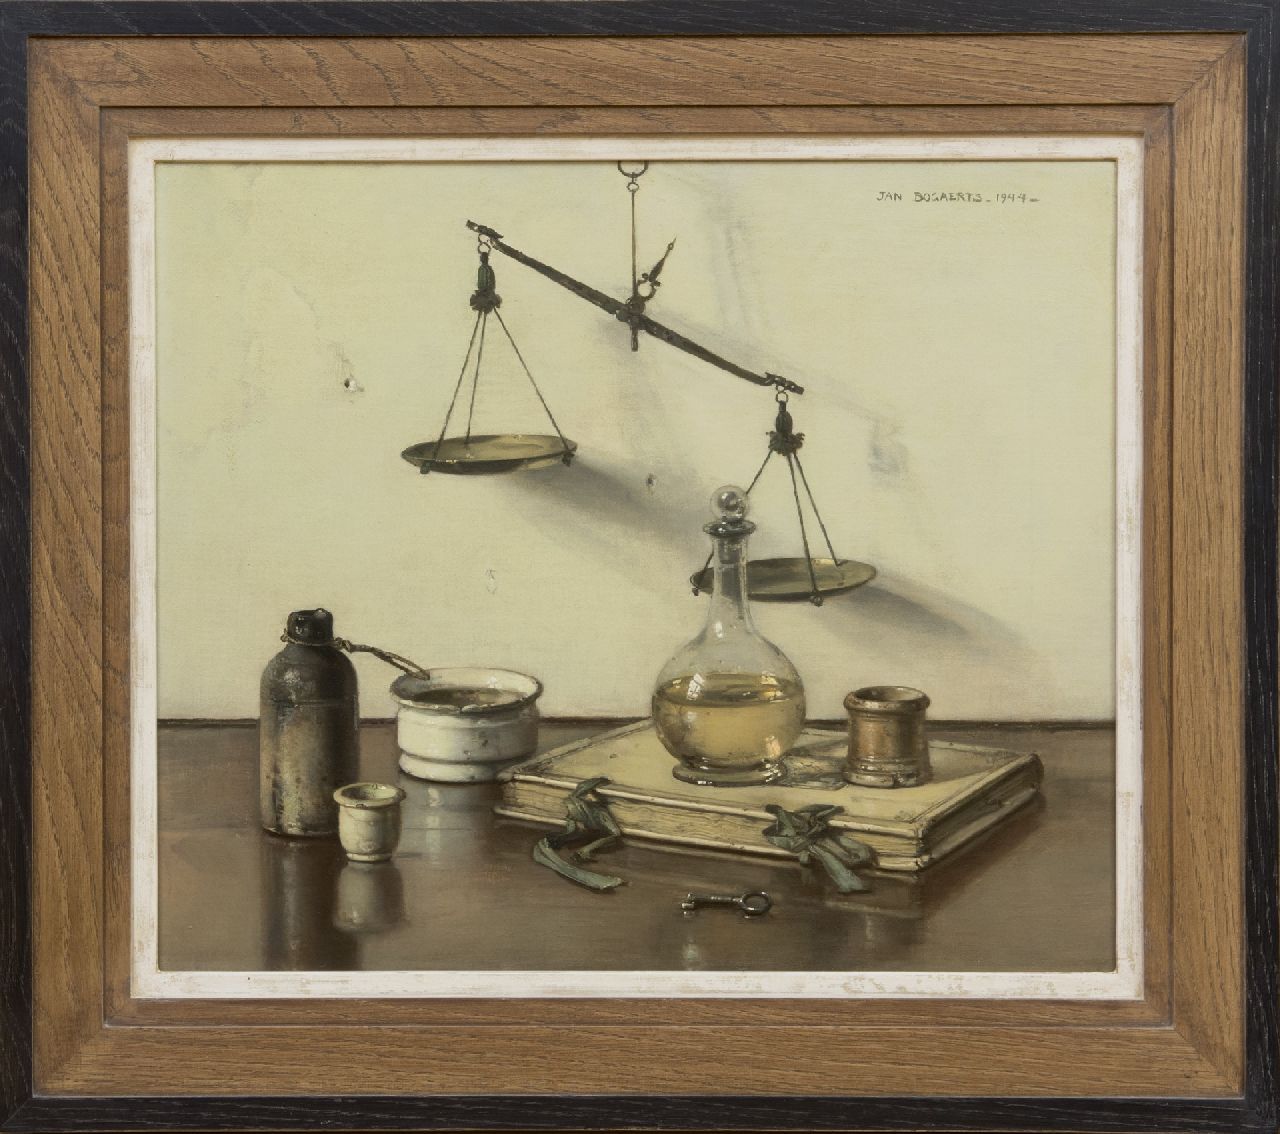 Bogaerts J.J.M.  | Johannes Jacobus Maria 'Jan' Bogaerts, A still life with a balance, book and a carafe, oil on canvas 36.0 x 42.9 cm, signed u.r. and dated 1944